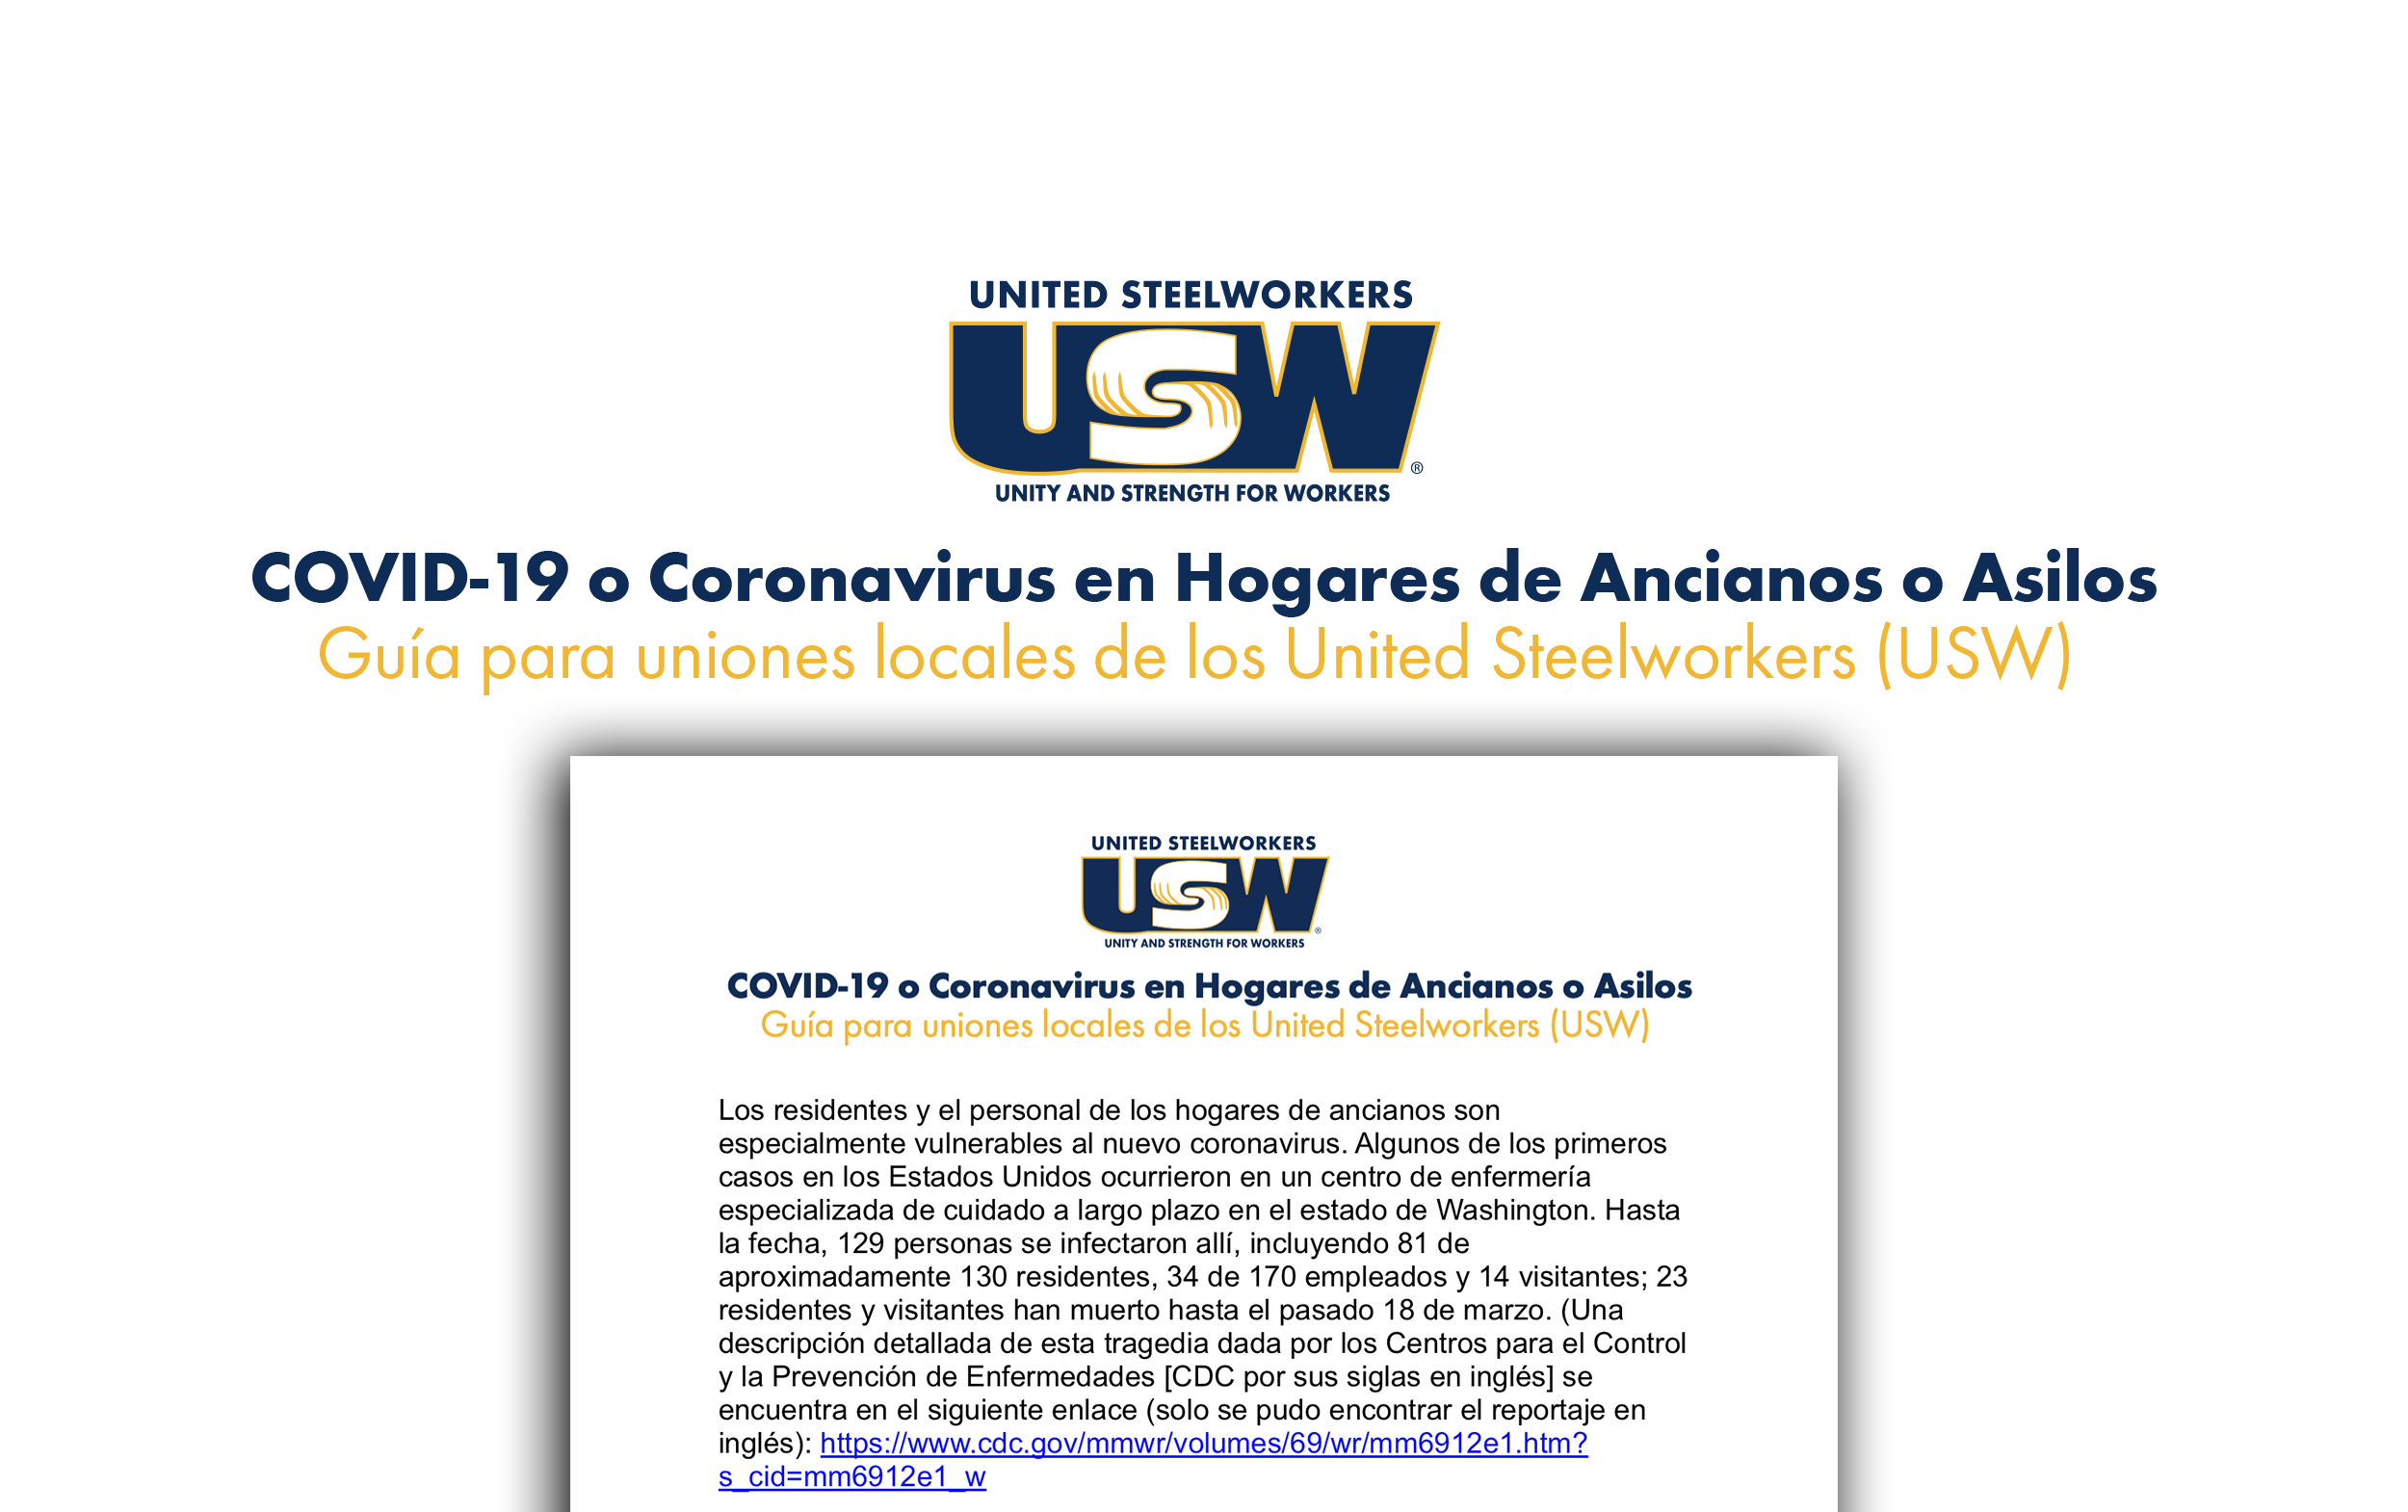 COVID-19 in Nursing Homes: A Guide for USW Local Unions in English and en Español